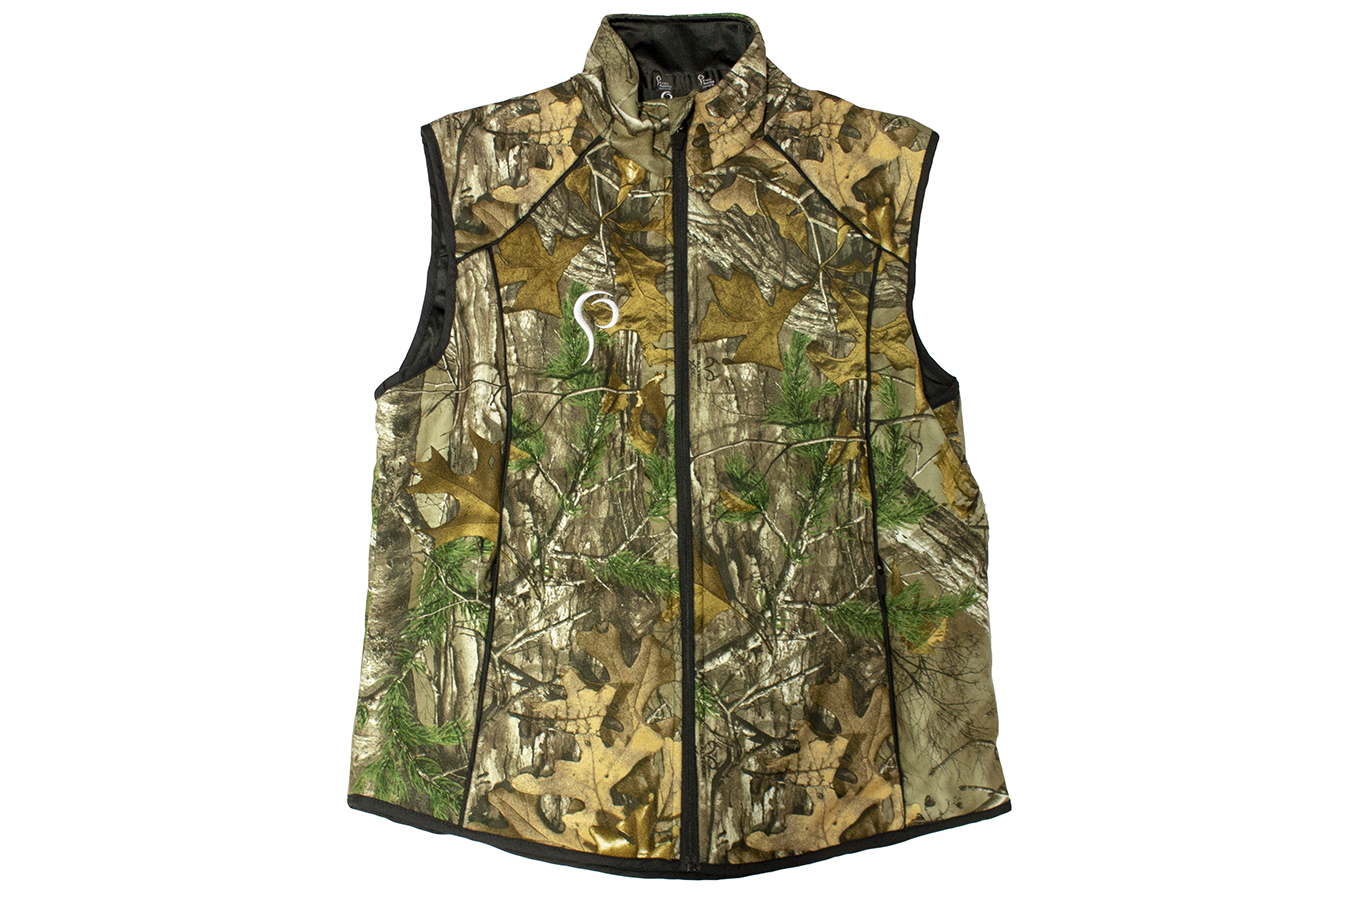 Prois Pro Edition Hunting Vest | Vance Outdoors